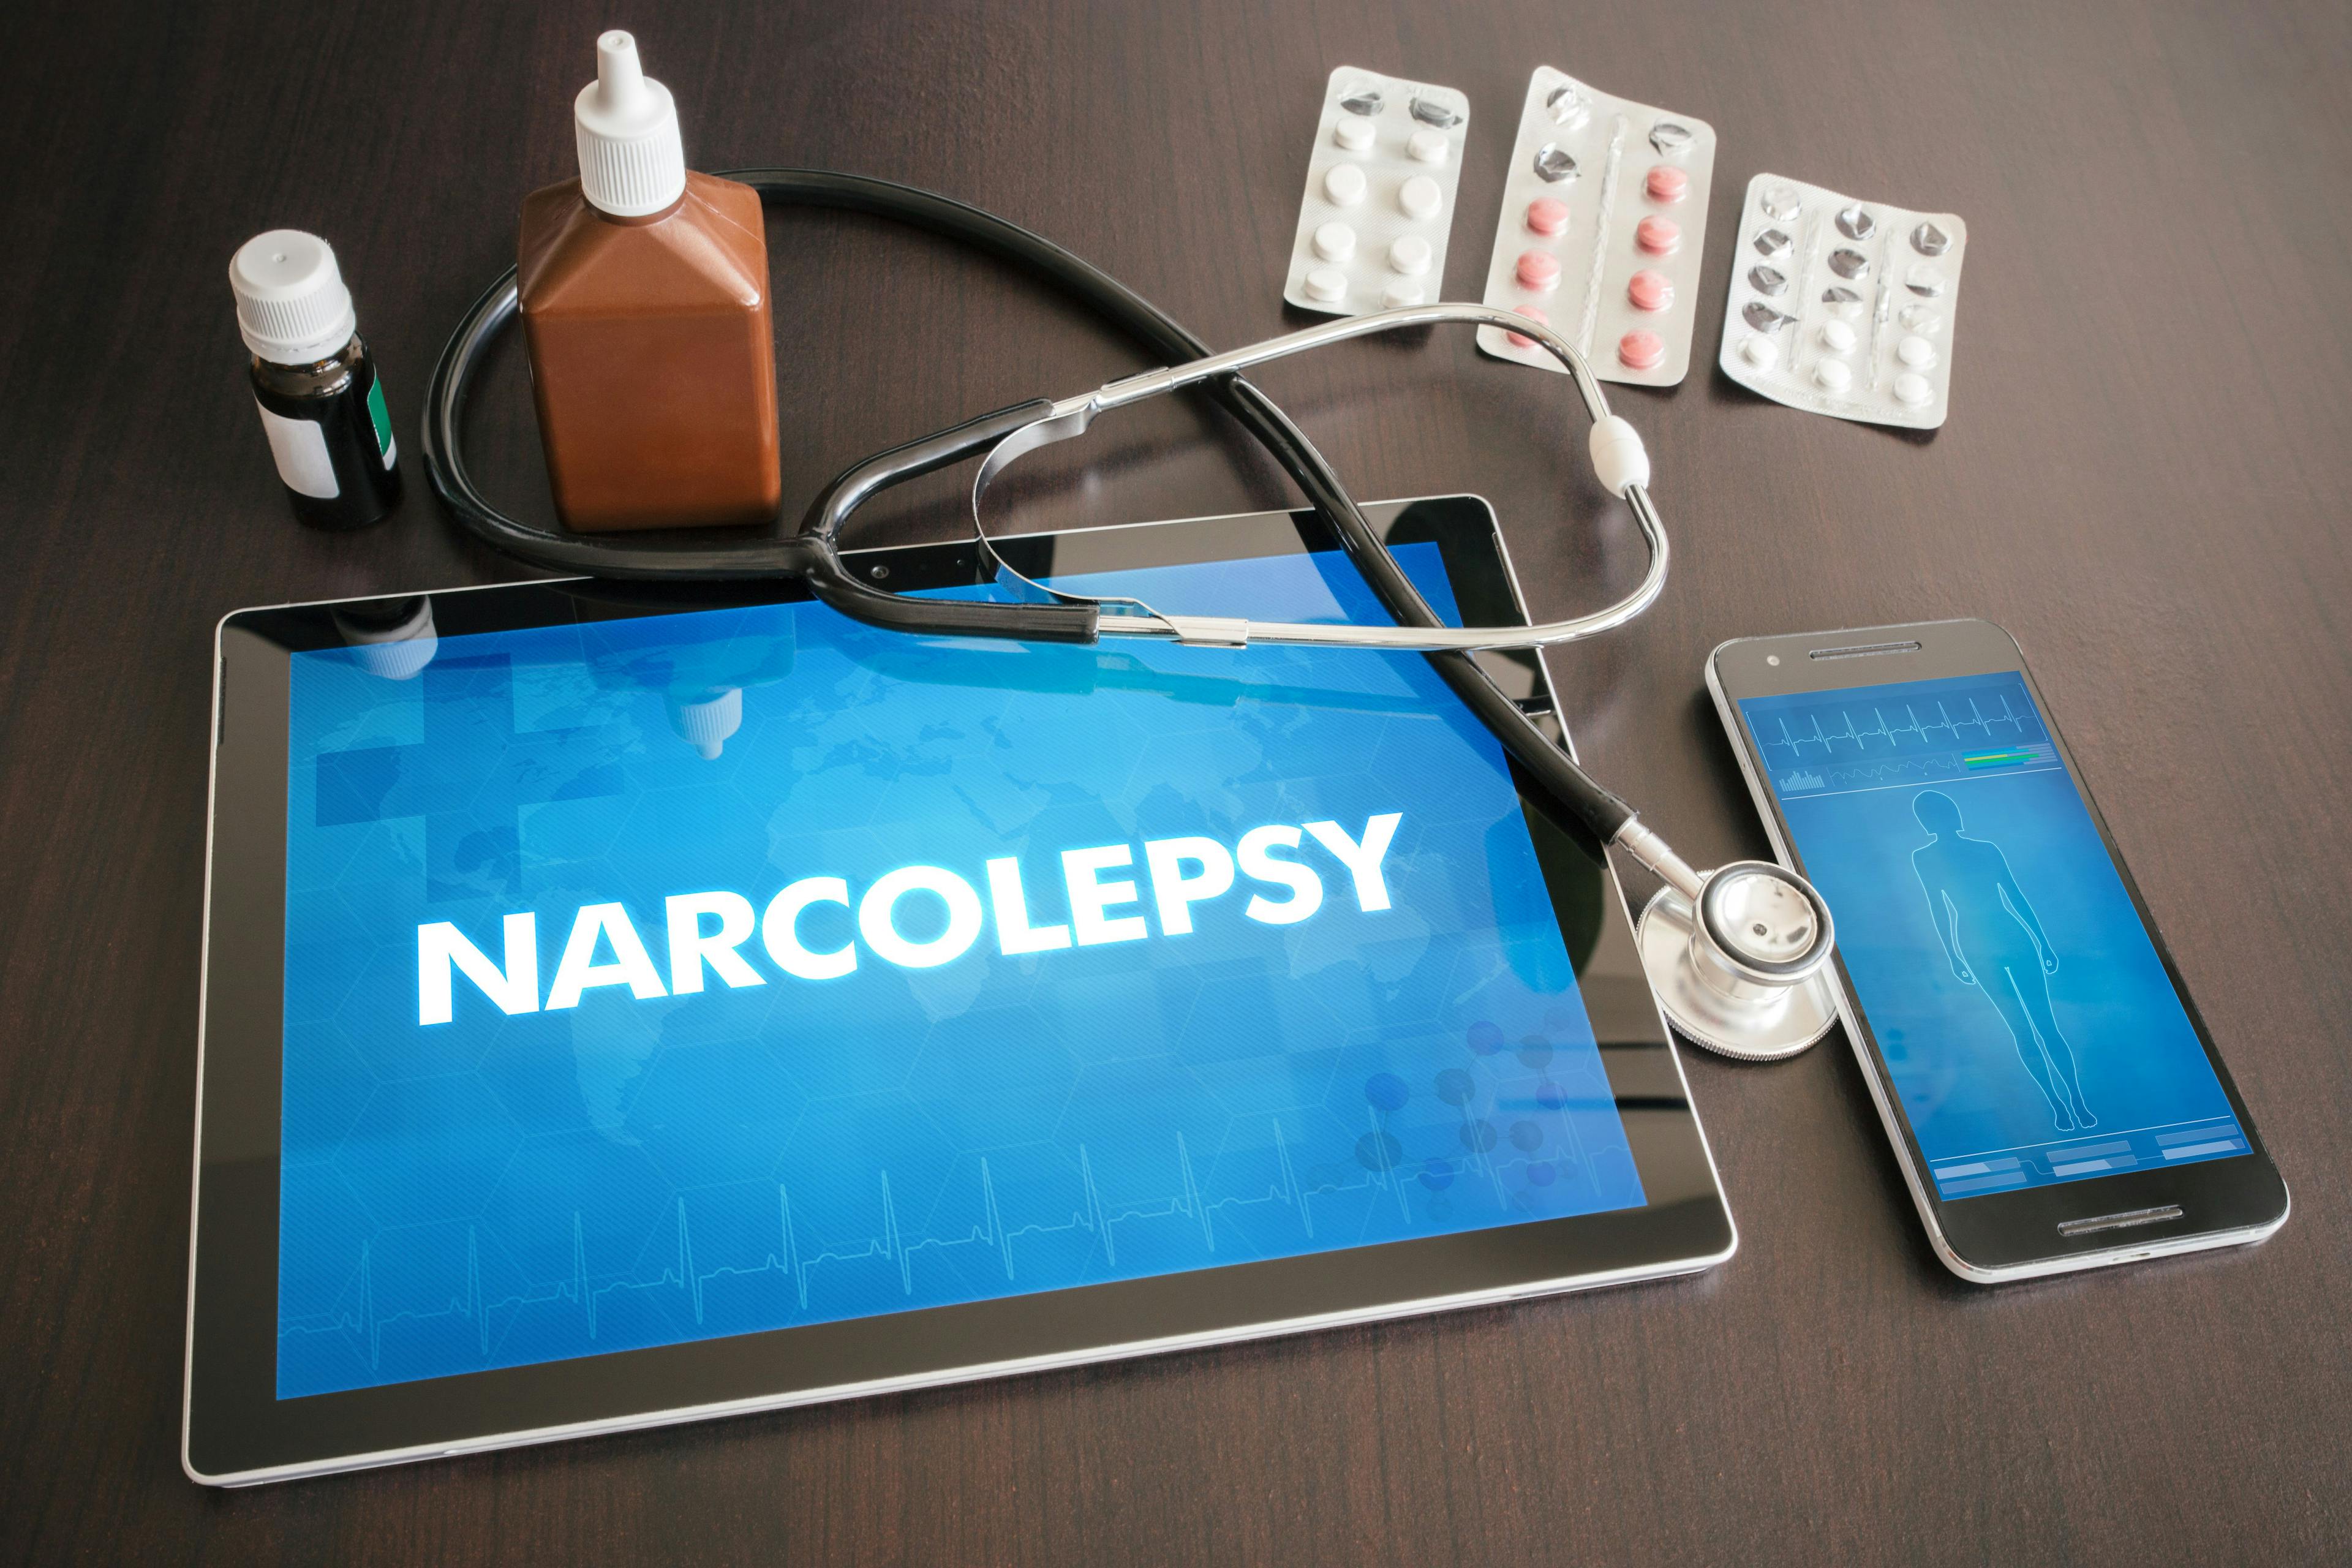 Image credit: ibreakstock | stock.adobe.com. Narcolepsy (neurological disorder) diagnosis medical concept on tablet screen with stethoscope